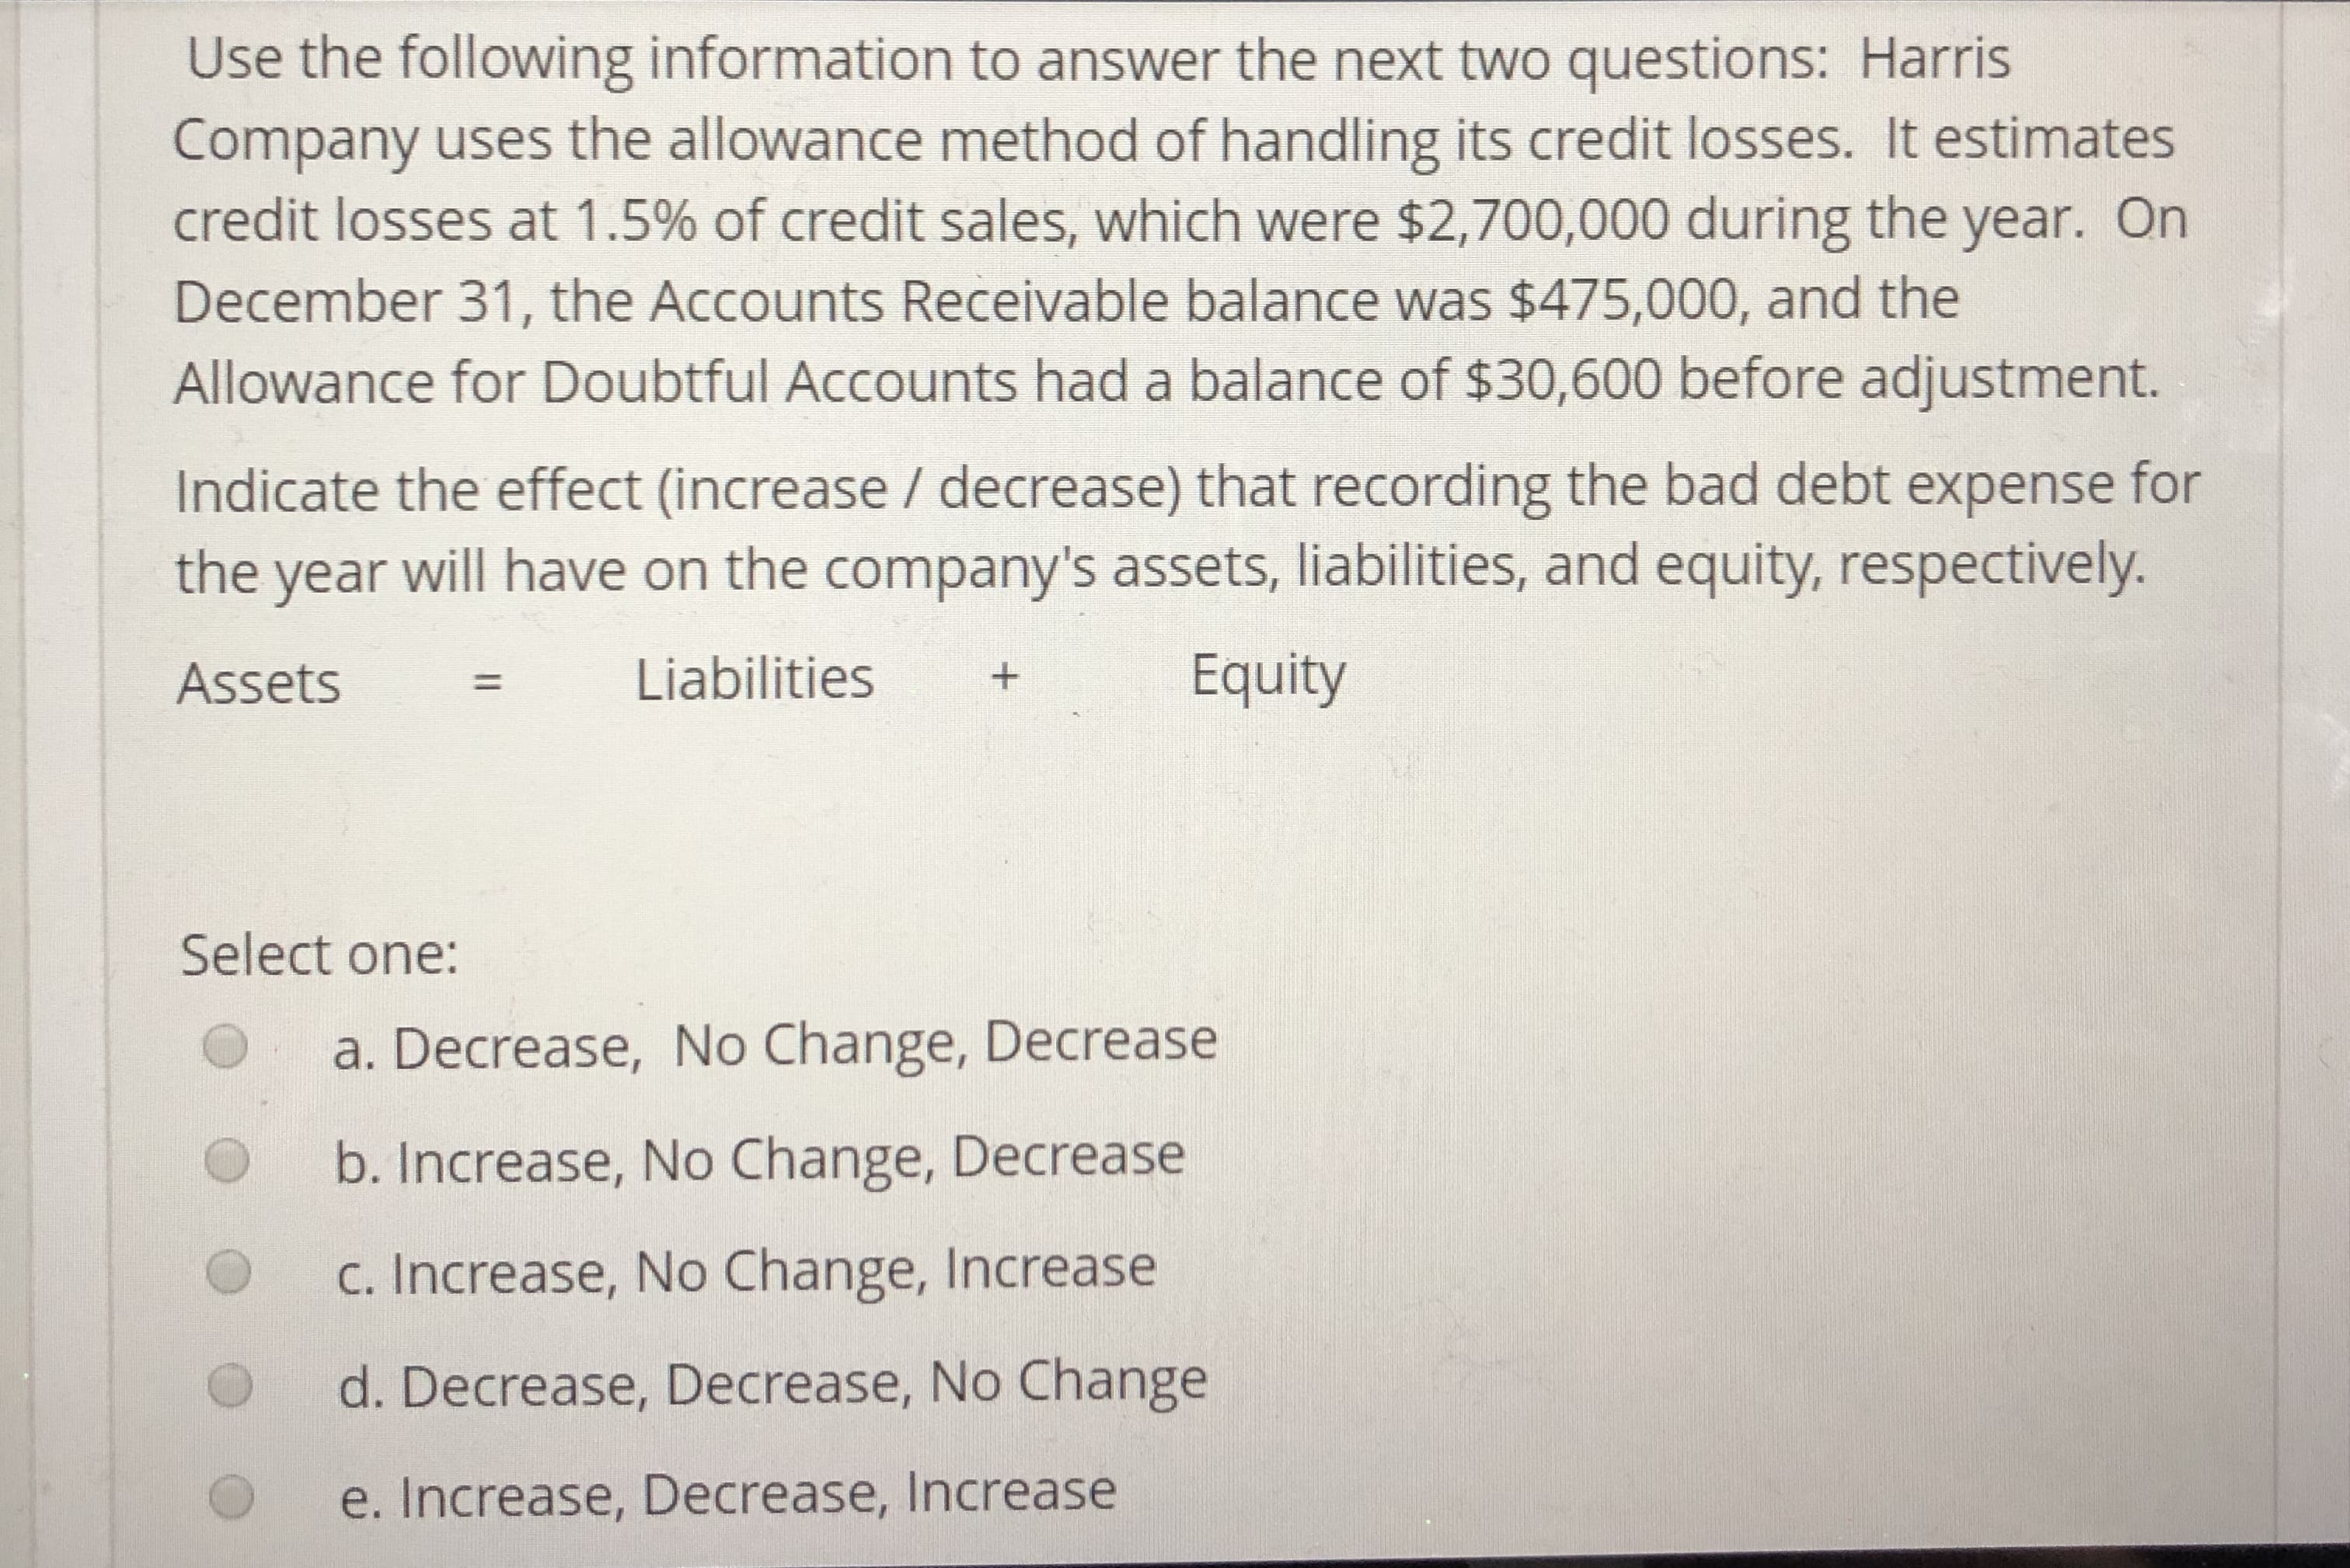 Use the following information to answer the next two questions: Harris
Company uses the allowance method of handling its credit losses. It estimates
credit losses at 1.5% of credit sales, which were $2,700,000 during the year. On
December 31, the Accounts Receivable balance was $475,000, and the
Allowance for Doubtful Accounts had a balance of $30,600 before adjustment.
Indicate the effect (increase / decrease) that recording the bad debt expense for
the year will have on the company's assets, liabilities, and equity, respectively.
Assets Liabilities
Equity
Select one:
a. Decrease, No Change, Decrease
b. Increase, No Change, Decrease
C. Increase, No Change, Increase
O
O d. Decrease, Decrease, No Change
e. Increase, Decrease, lncrease
